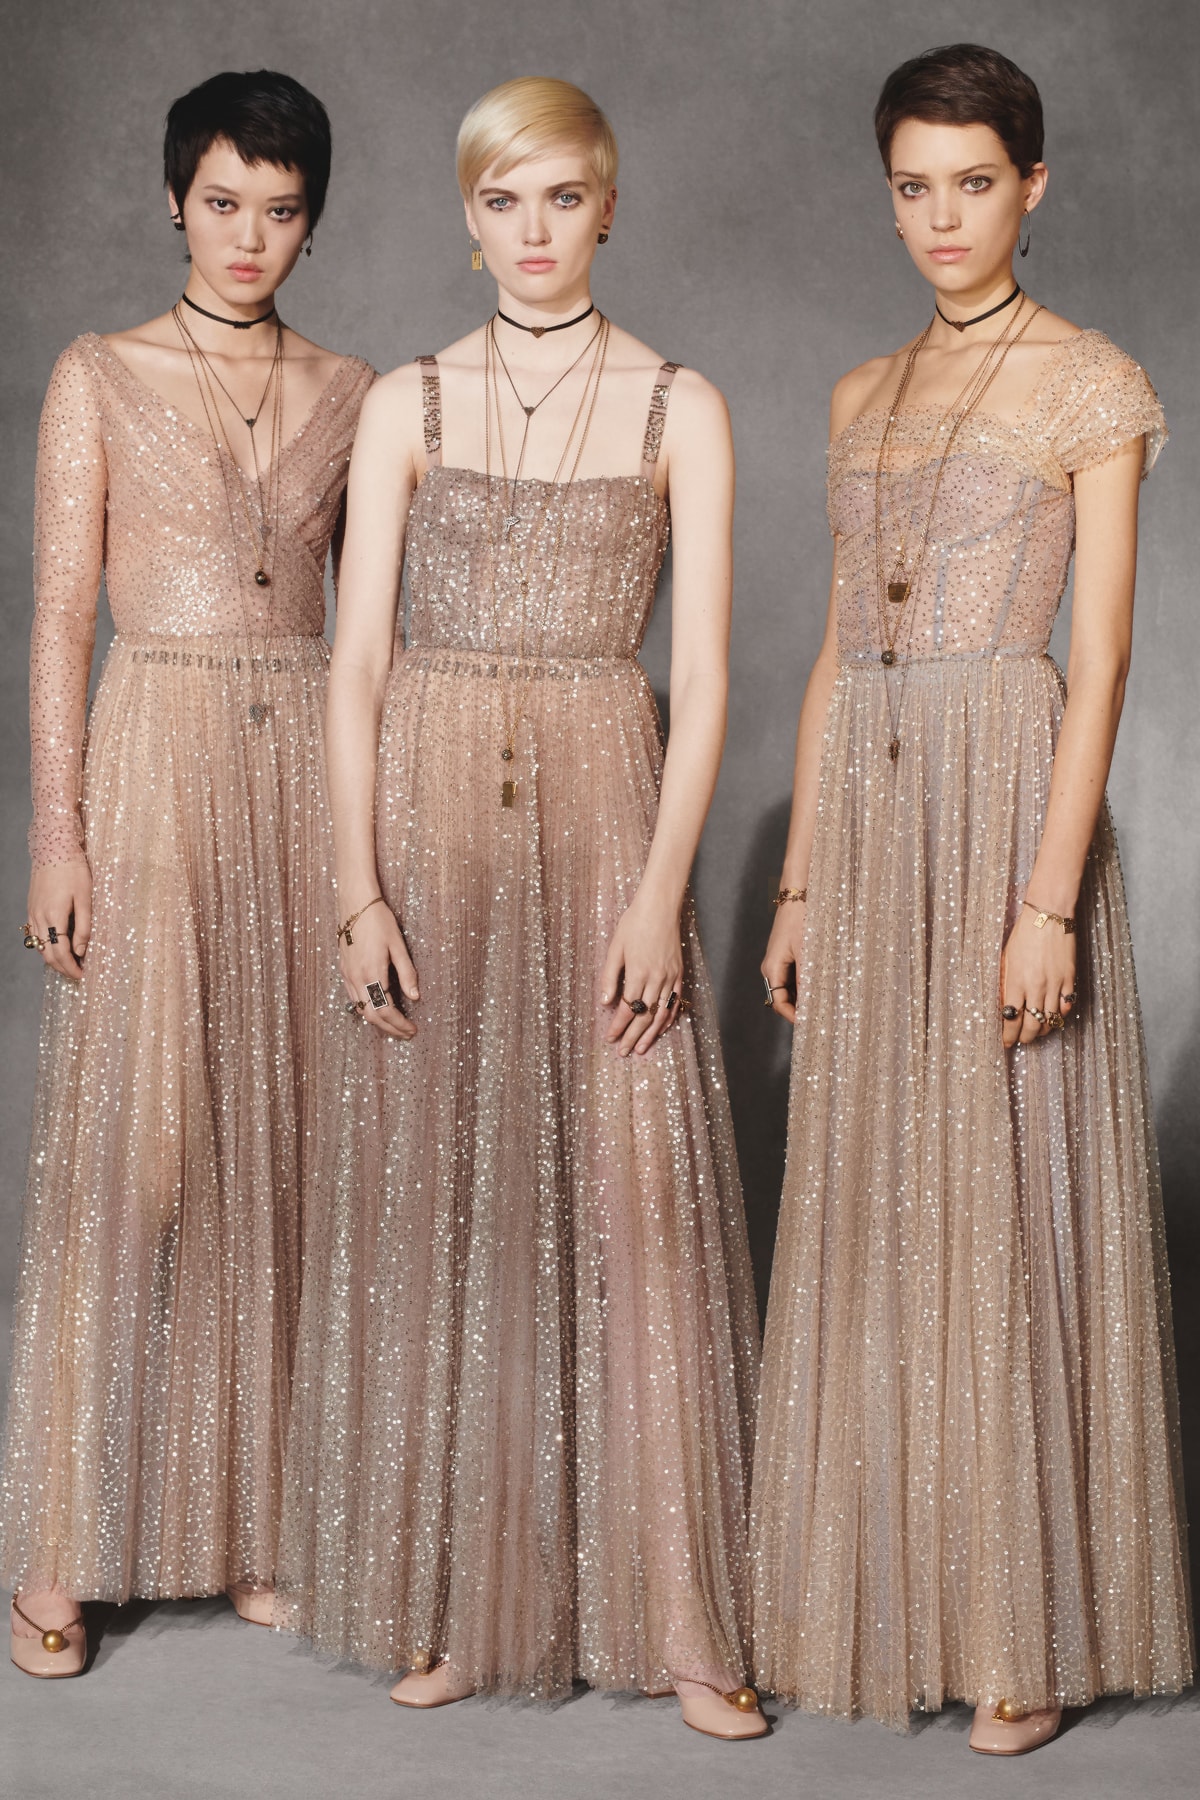 Dior Fall 2018 Collection Lookbook Sheer Tulle Dresses Tan